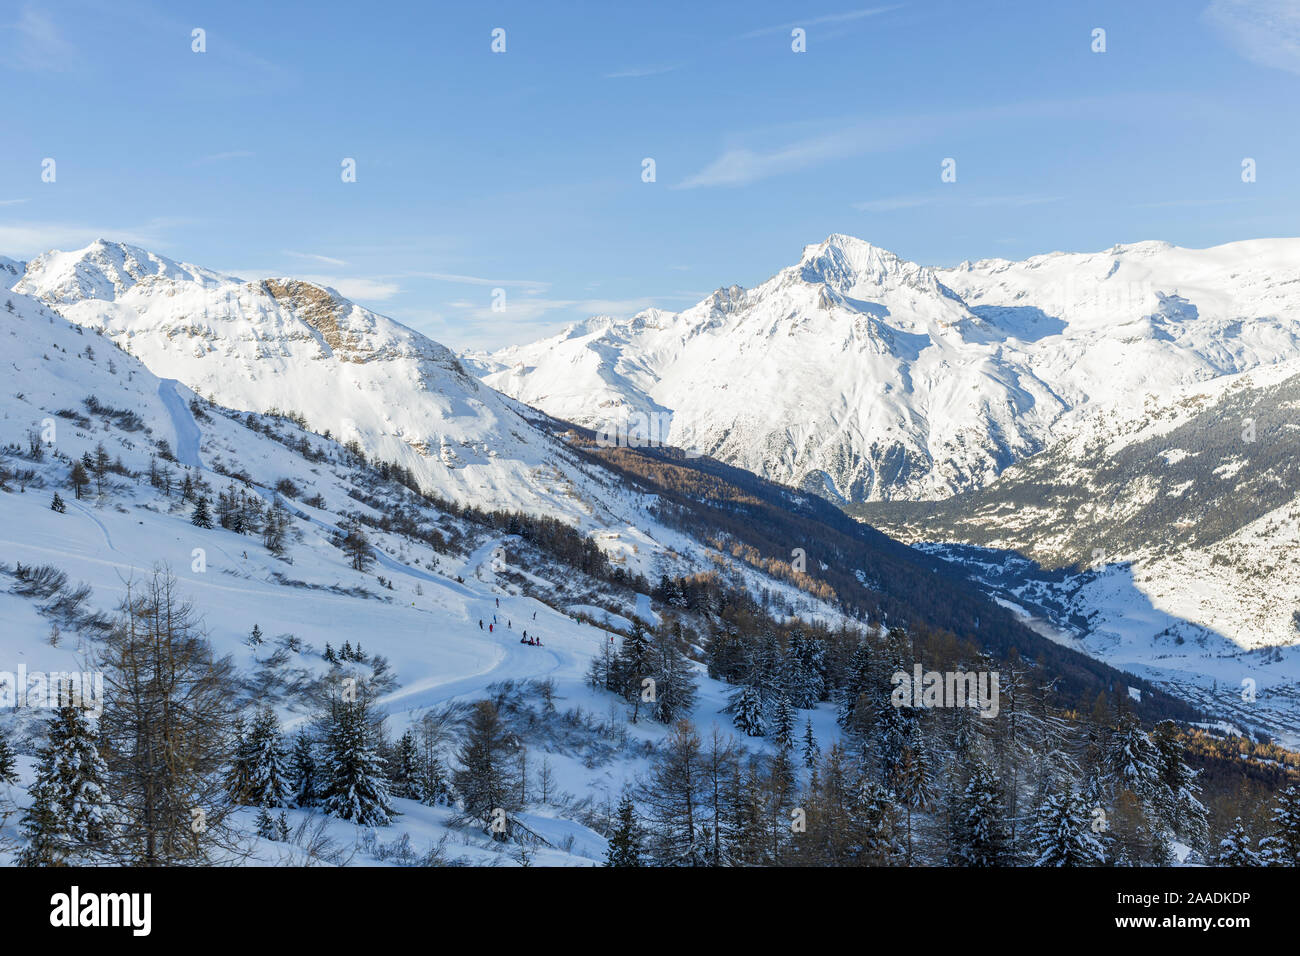 Winter view of the mountains pass in the ski resort of Val Cenis located in the Savoie department in the Rhone-Alpes region. Stock Photo